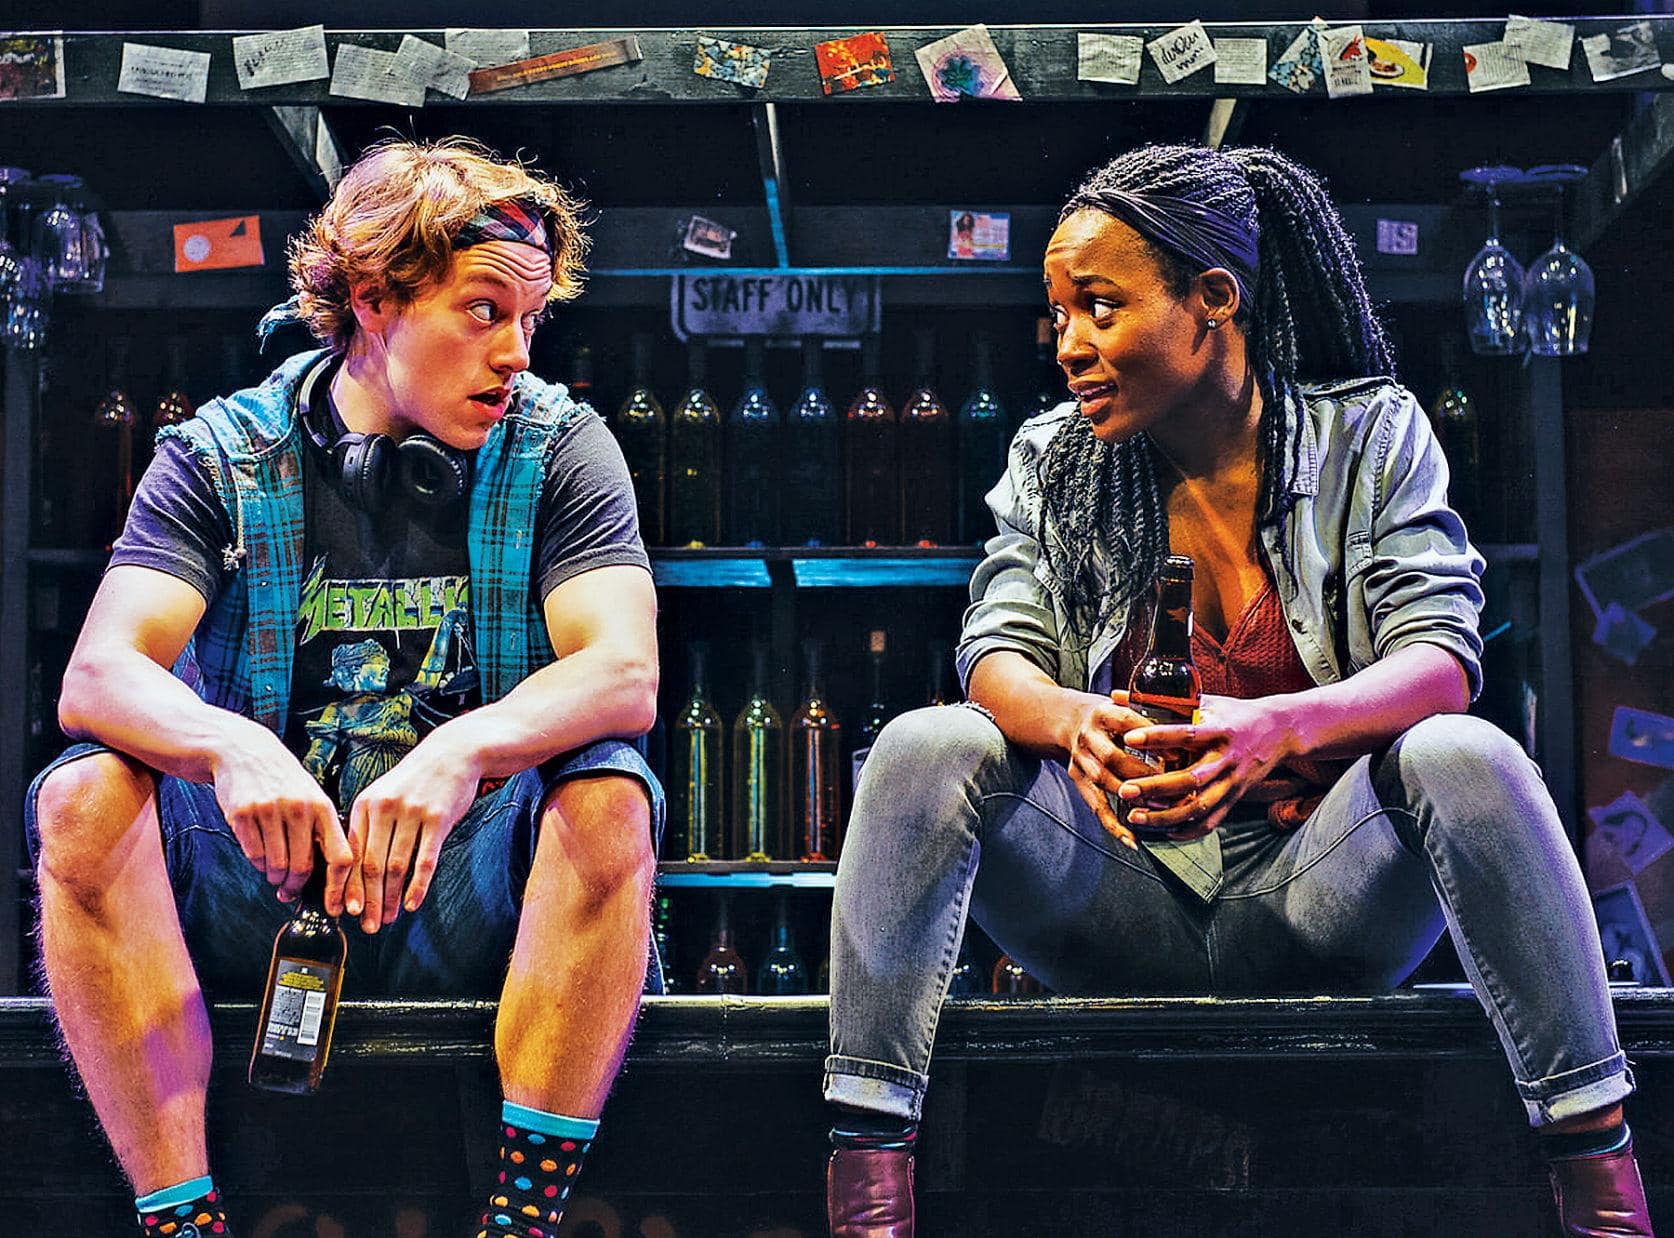 Harrison Smith and Billie Krishawn in "Airness," performed at 1st Stage in 2019. Photo by Cameron Whitman.